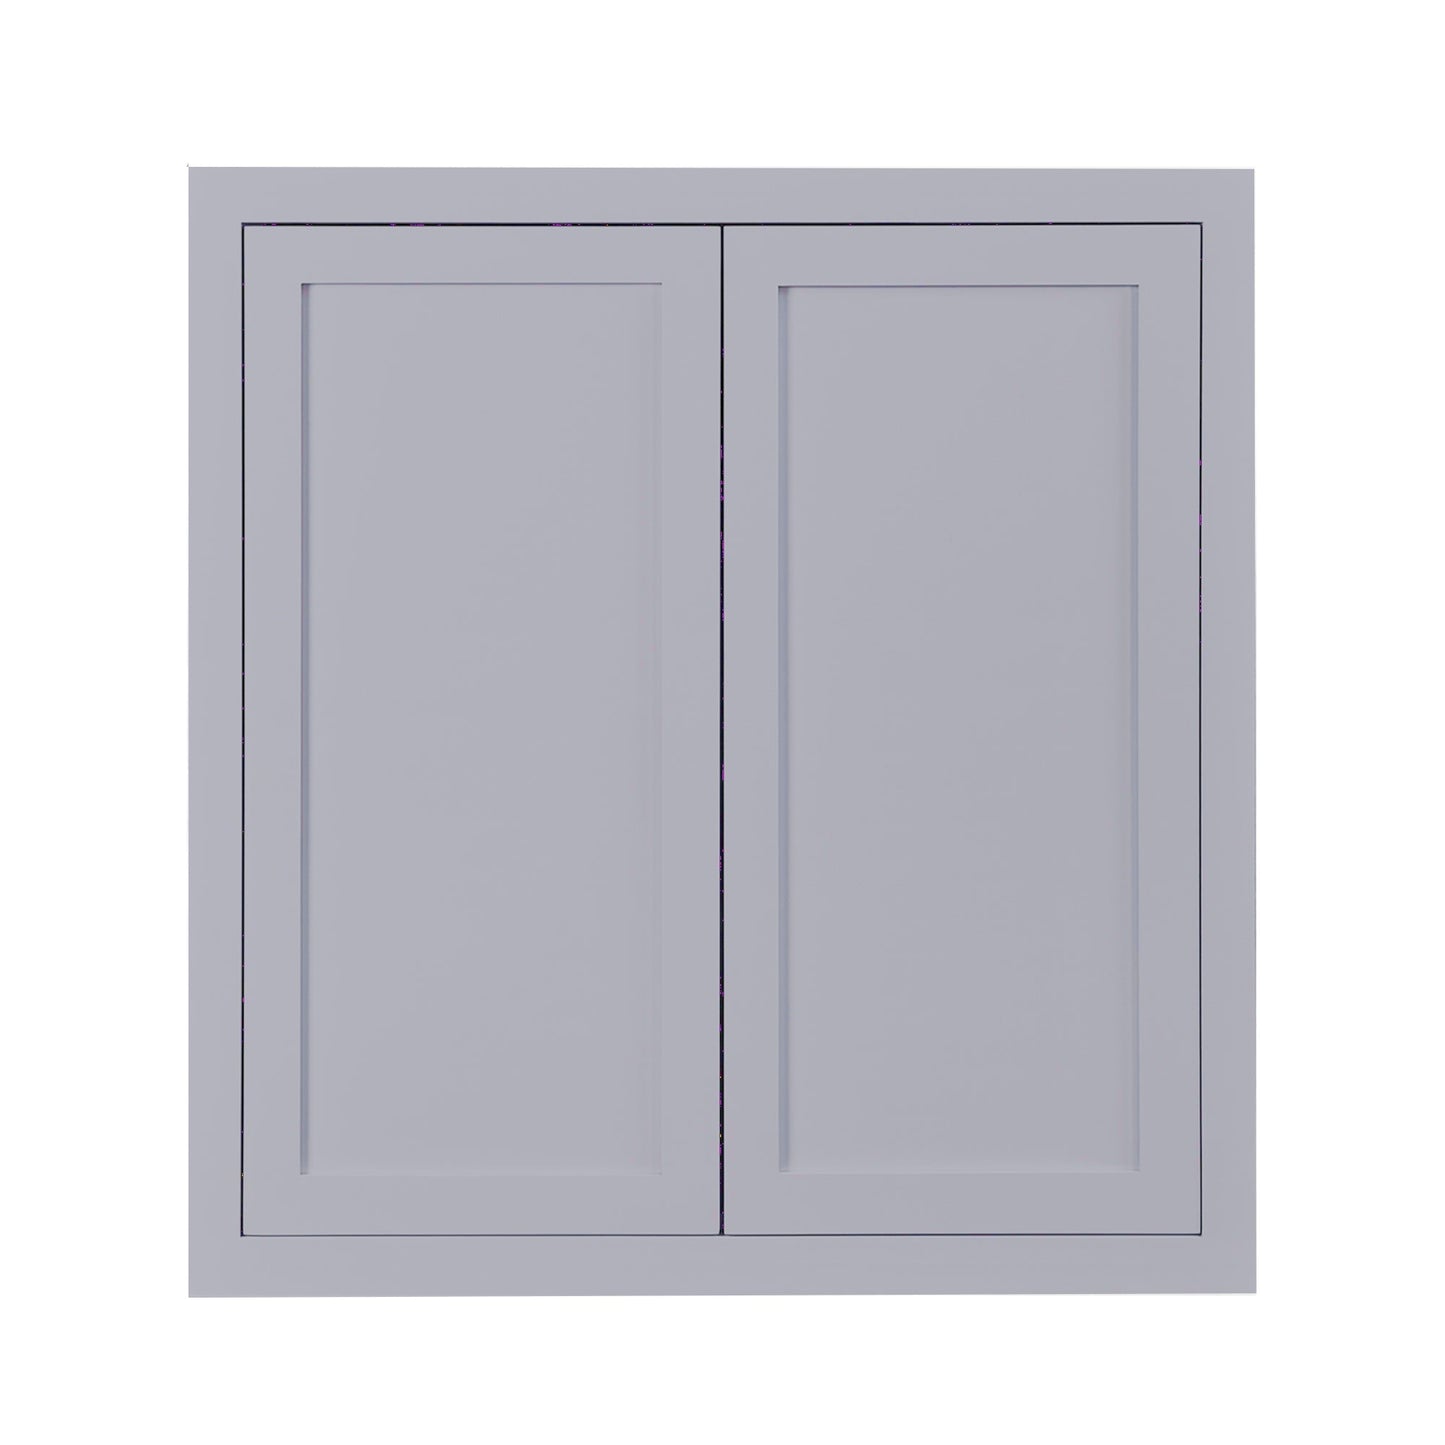 Maplevilles Cabinetry 36" x 39" Light Gray Inset Modern Shaker Style RTA Birch Wood Wall Storage Cabinet With 2 Doors & 2 Shelf Boards